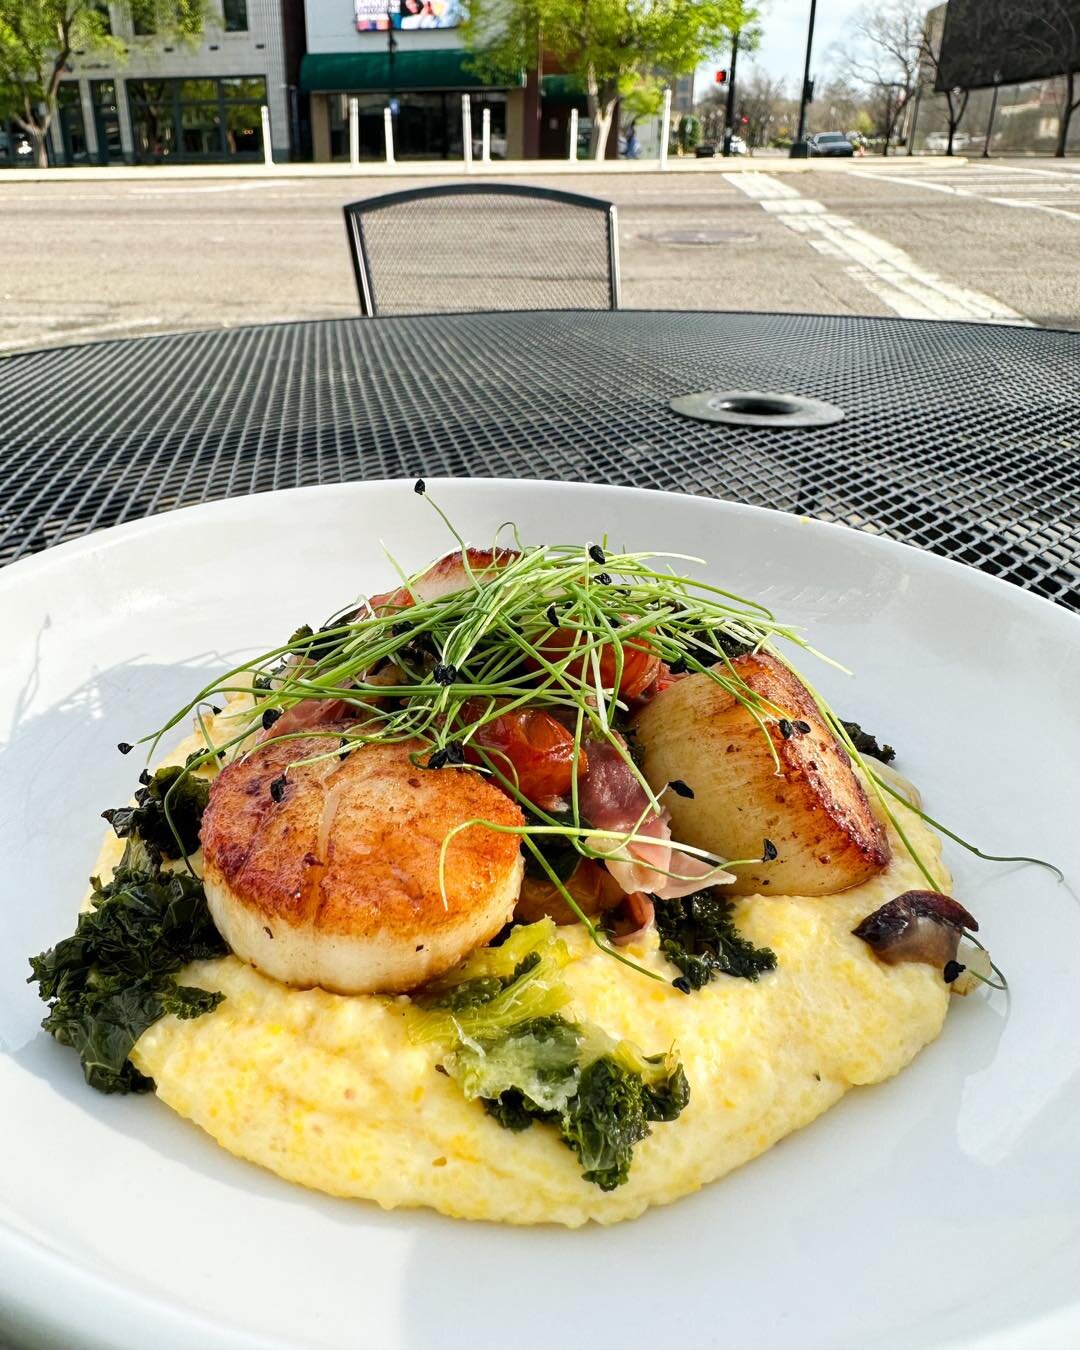 Indulge in coastal flavors with our weekend special: Scallop n&rsquo; Grits! 🌊 Savor tender diver scallops atop creamy SC yellow grits, paired perfectly with kale and savory prosciutto. Limited time only! 

#WeekendSpecial #ScallopNGrits #CoastalFla